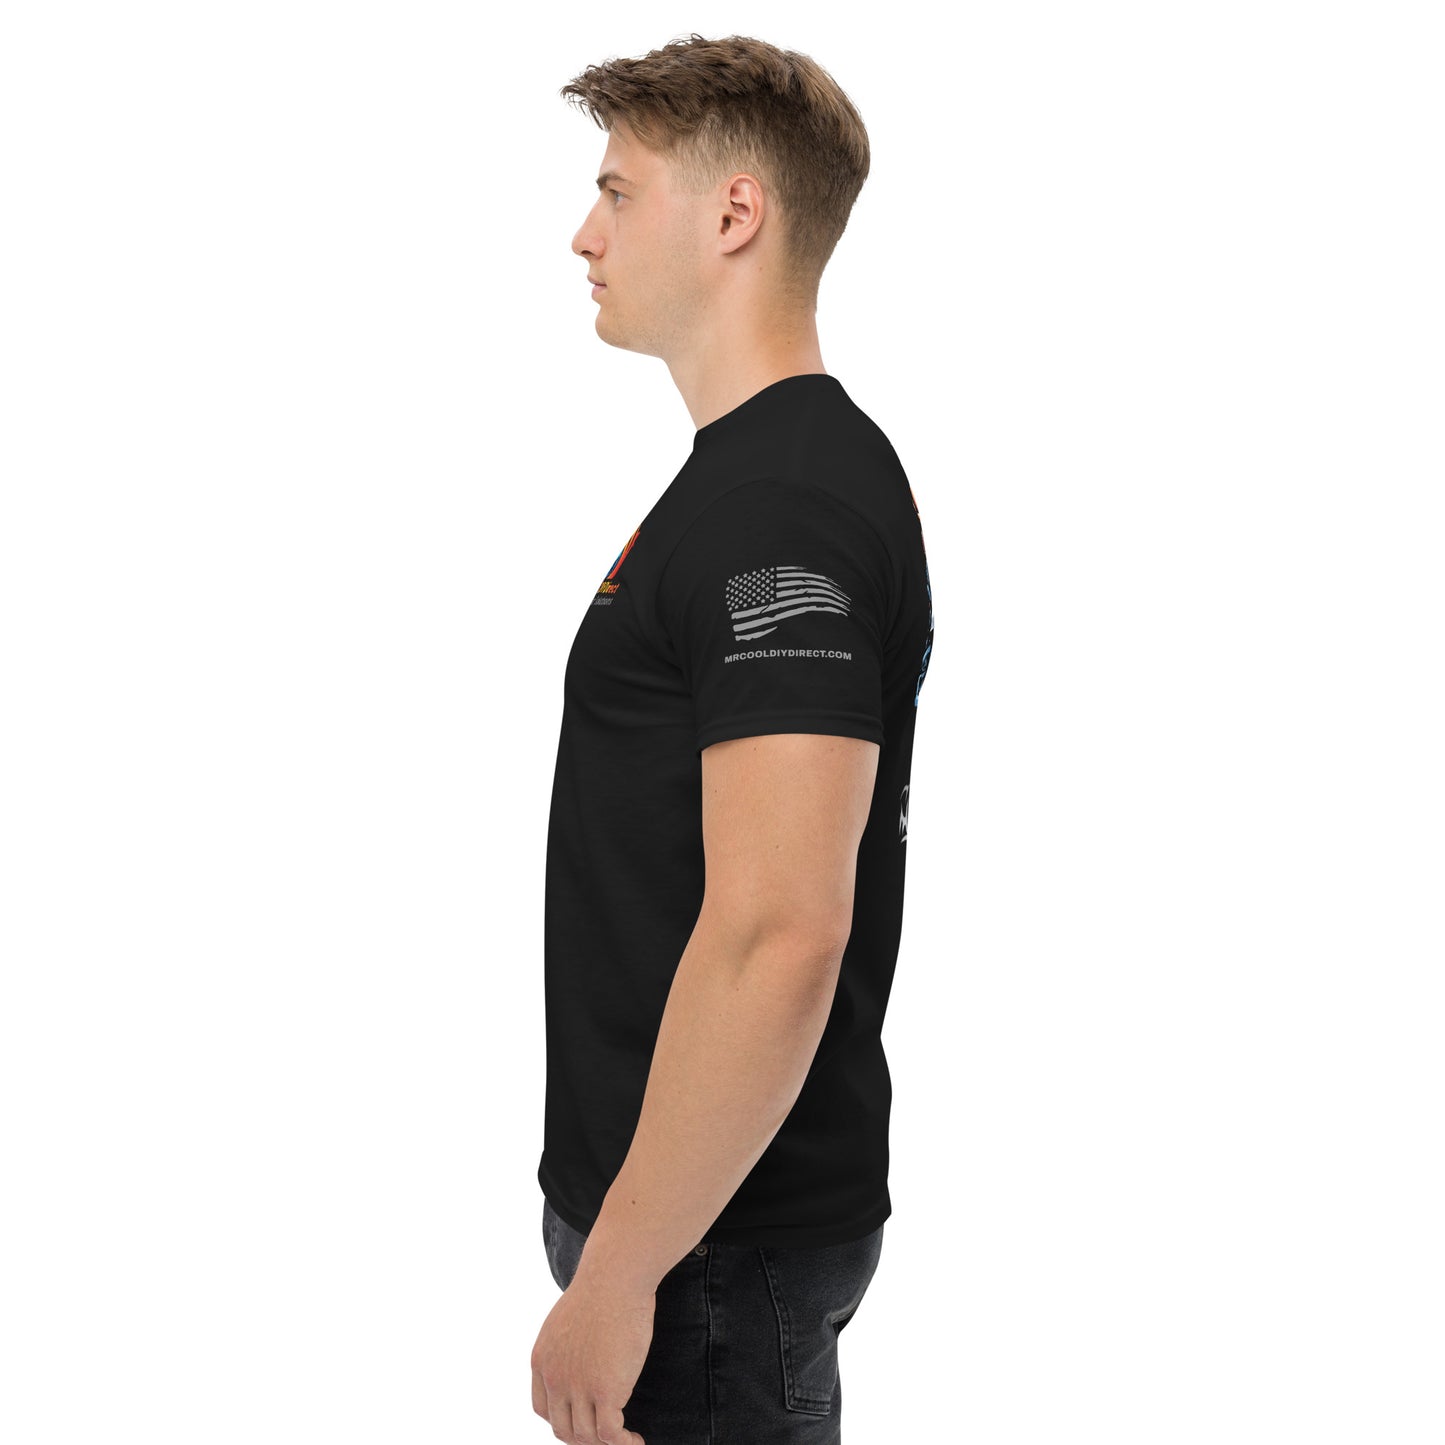 A side view of a young man wearing an Exclusive HVAC-Themed Custom Tee by MRCOOL DIY Direct with a logo and an American flag design on the sleeve. He is facing left with a neutral expression.